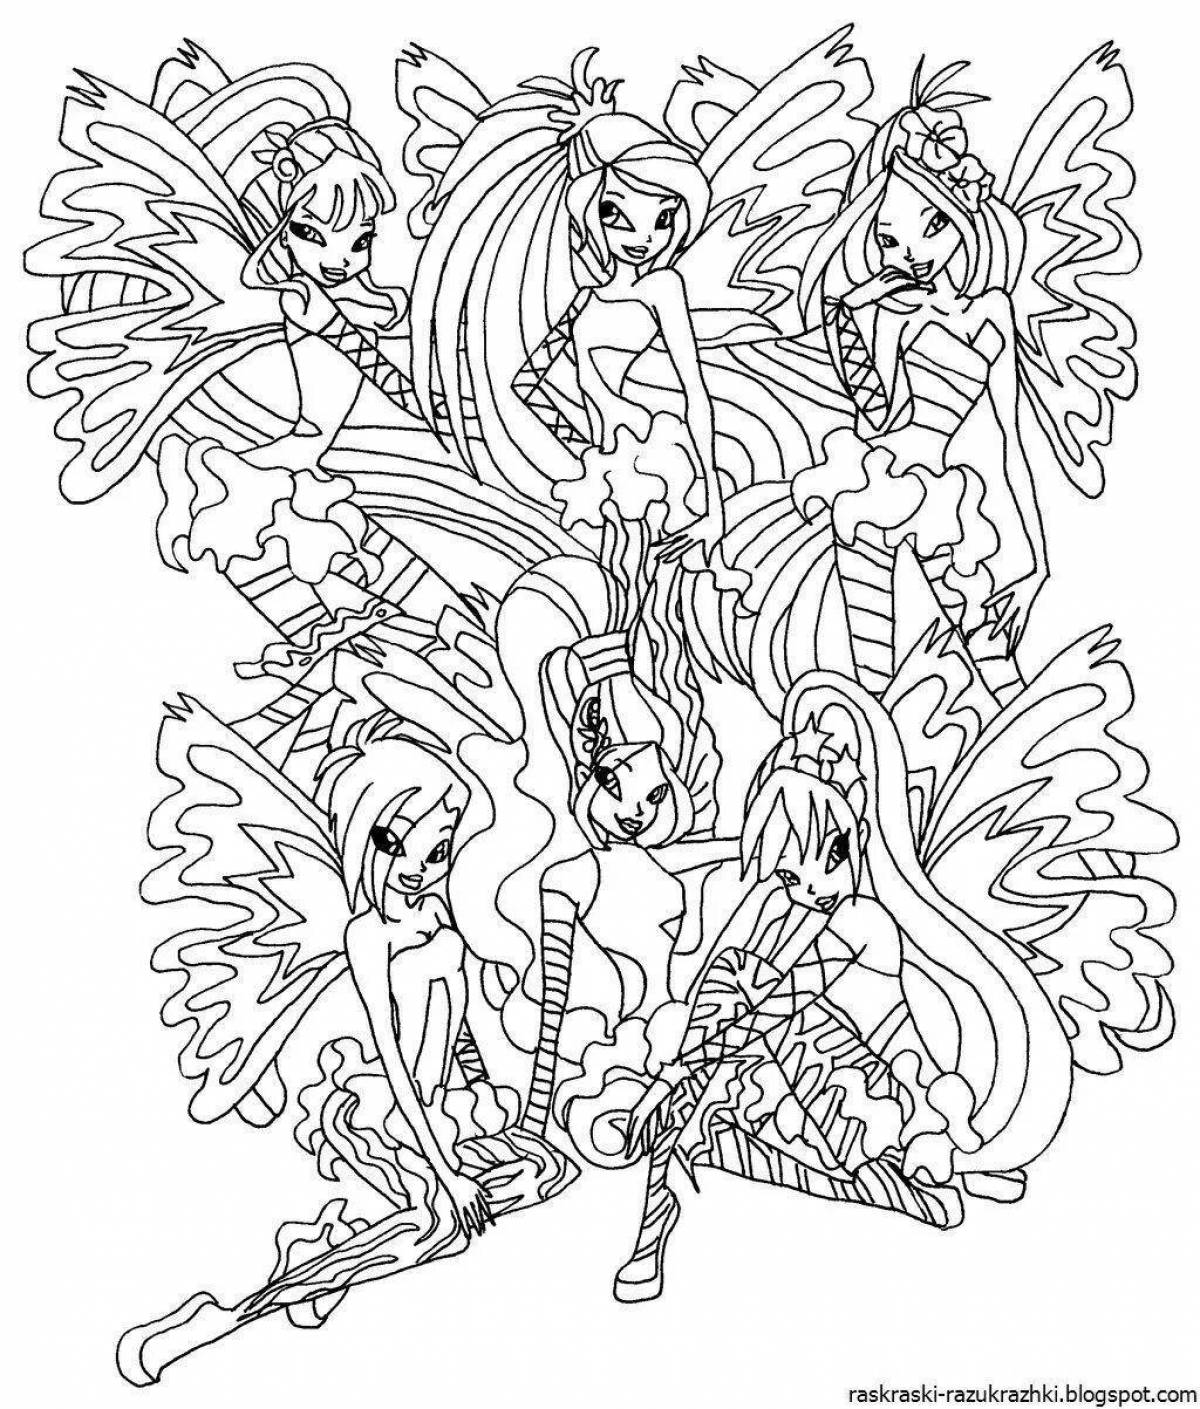 Brilliant winx coloring pages for girls fairies